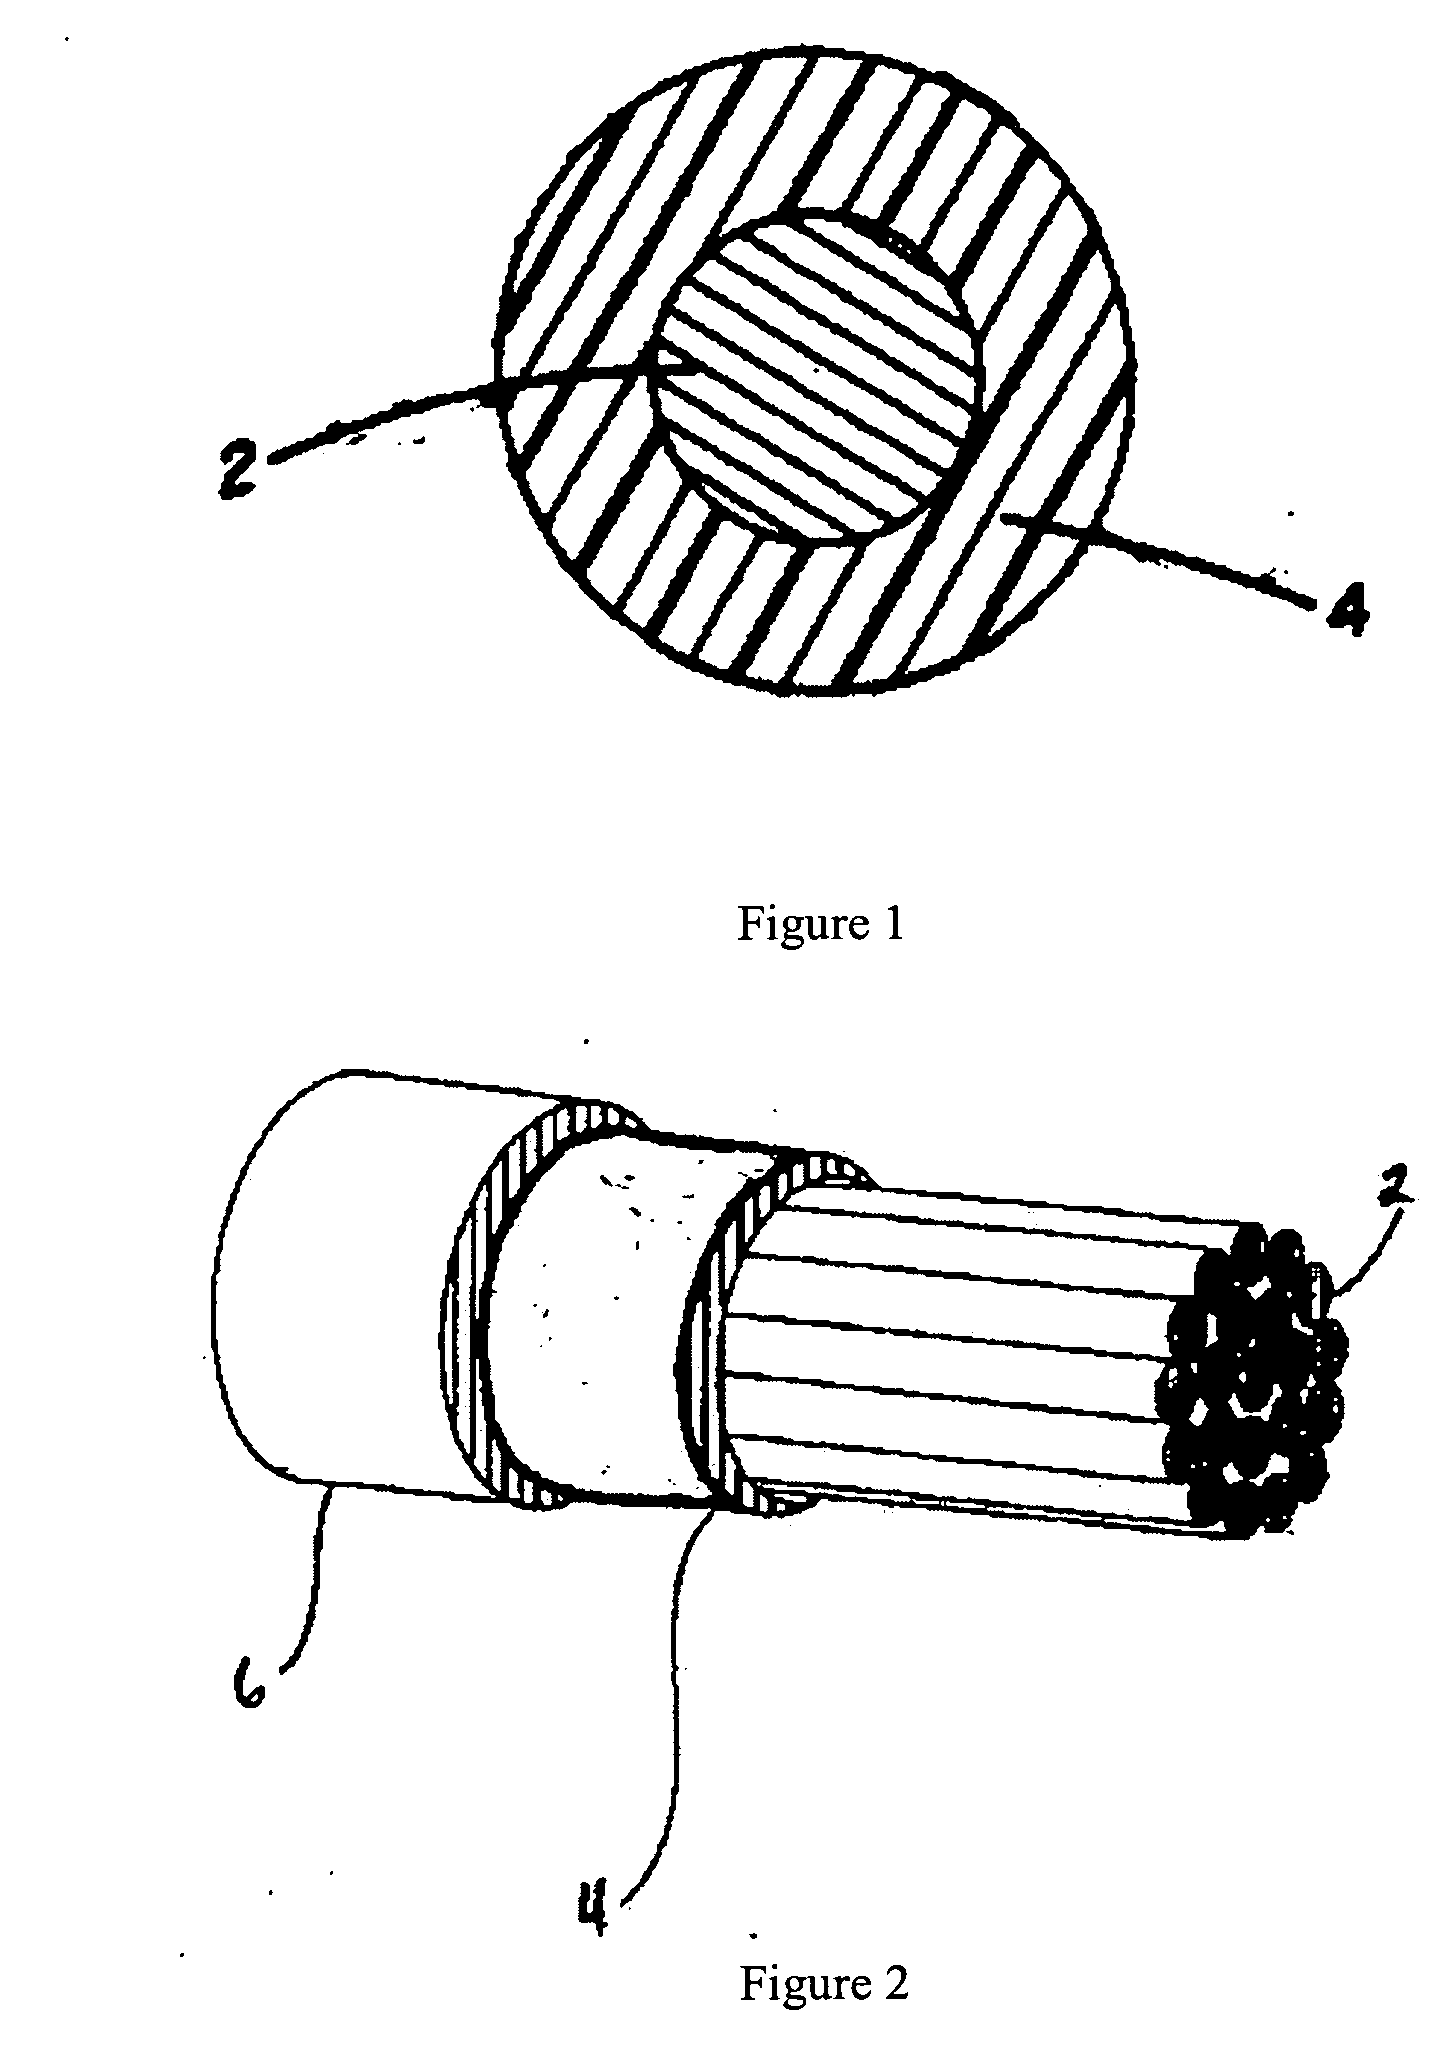 Flame retardant electrical wire